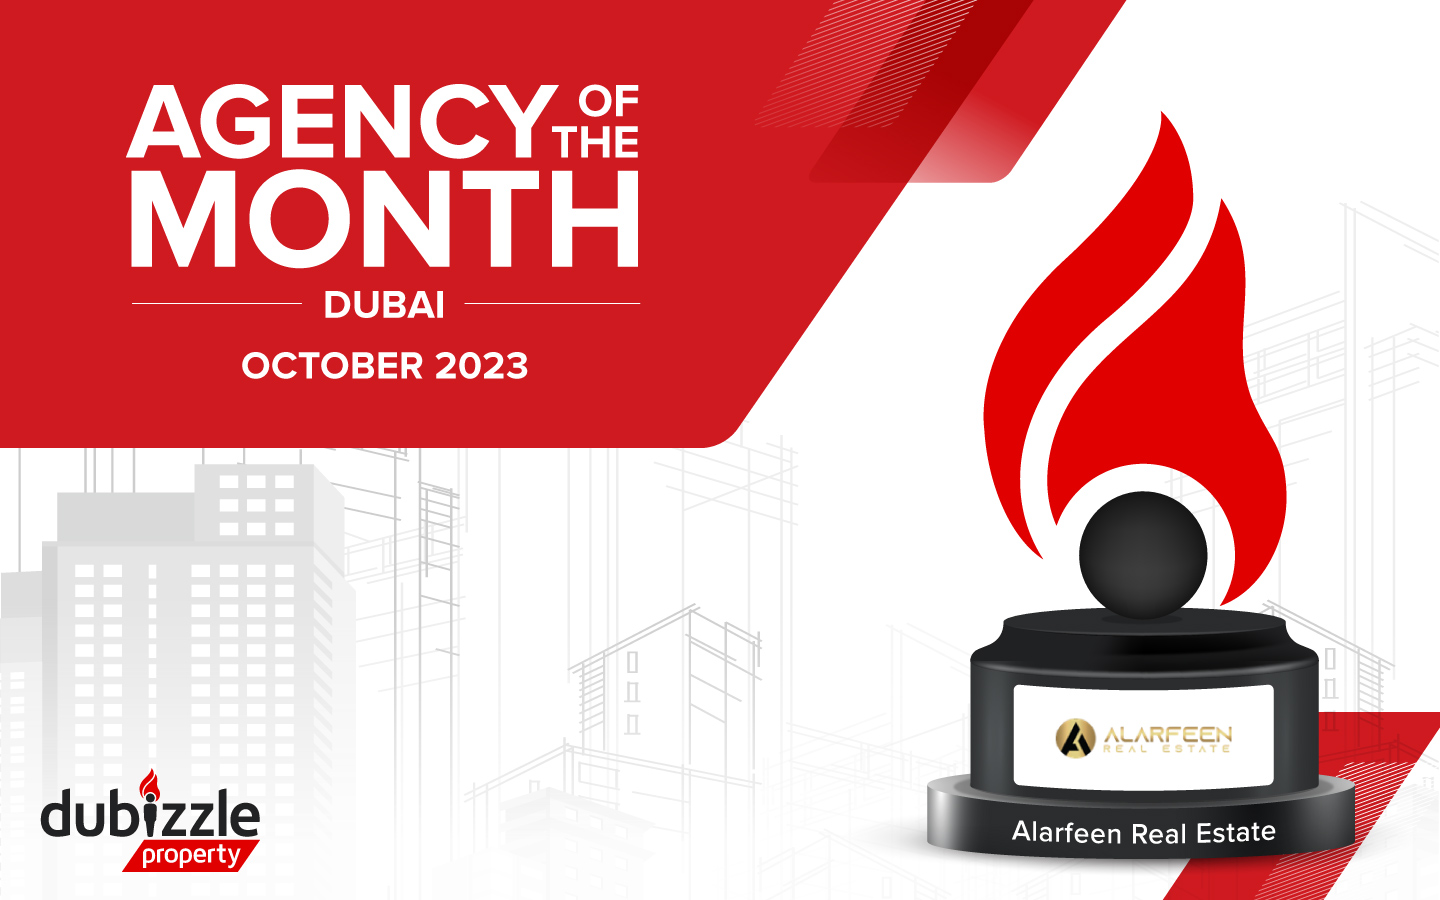 Agency of the month Dubai October 2023